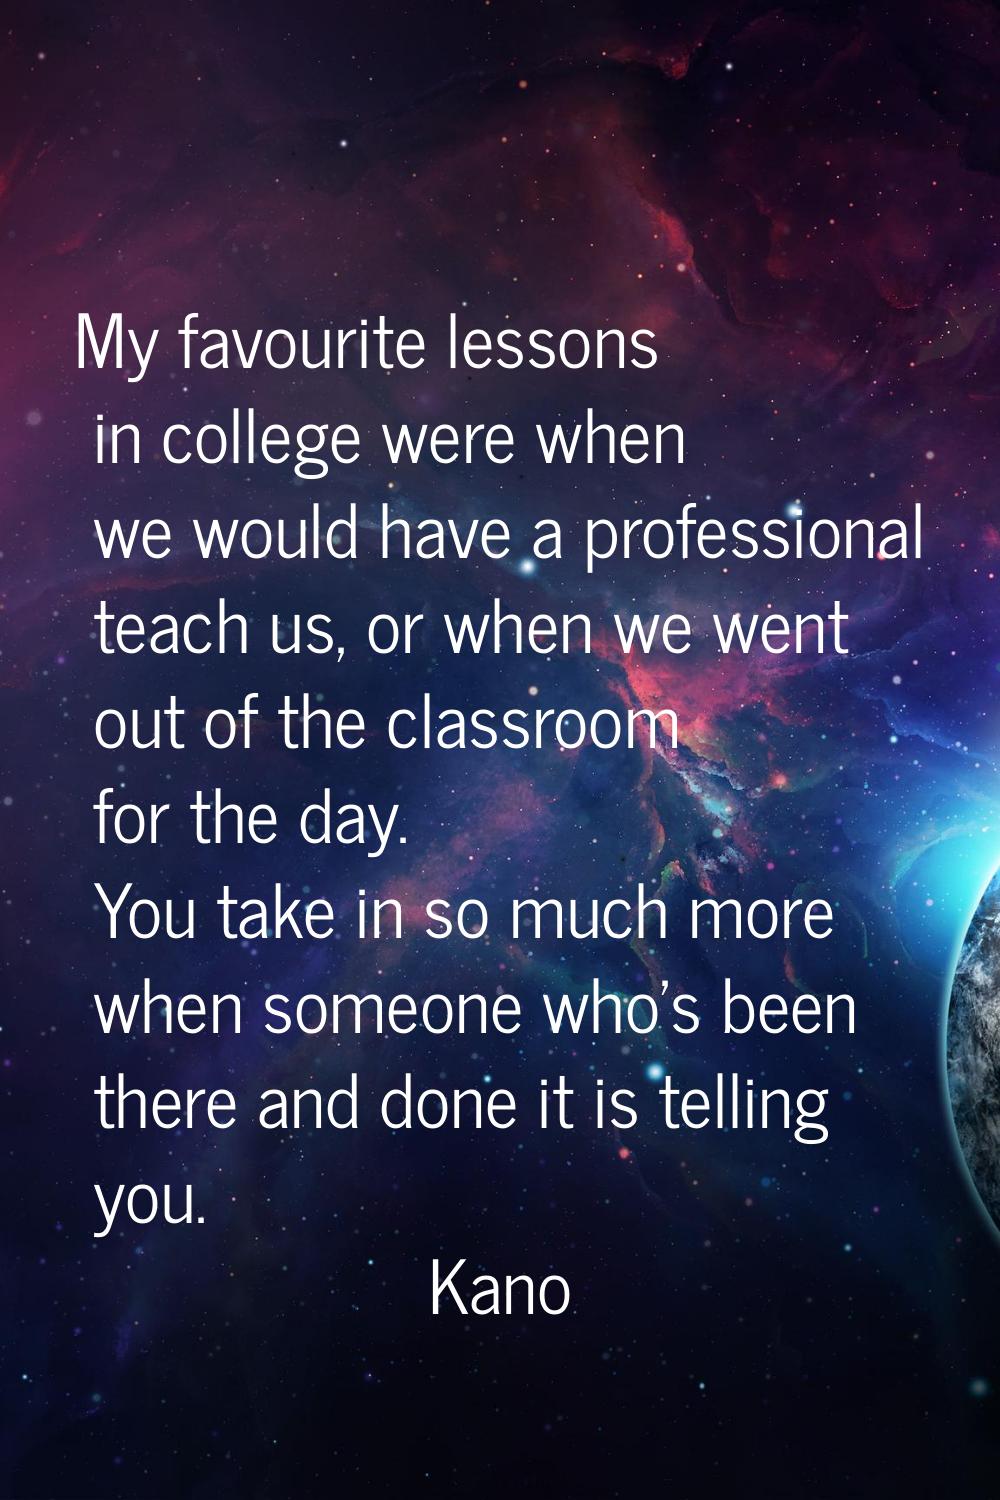 My favourite lessons in college were when we would have a professional teach us, or when we went ou